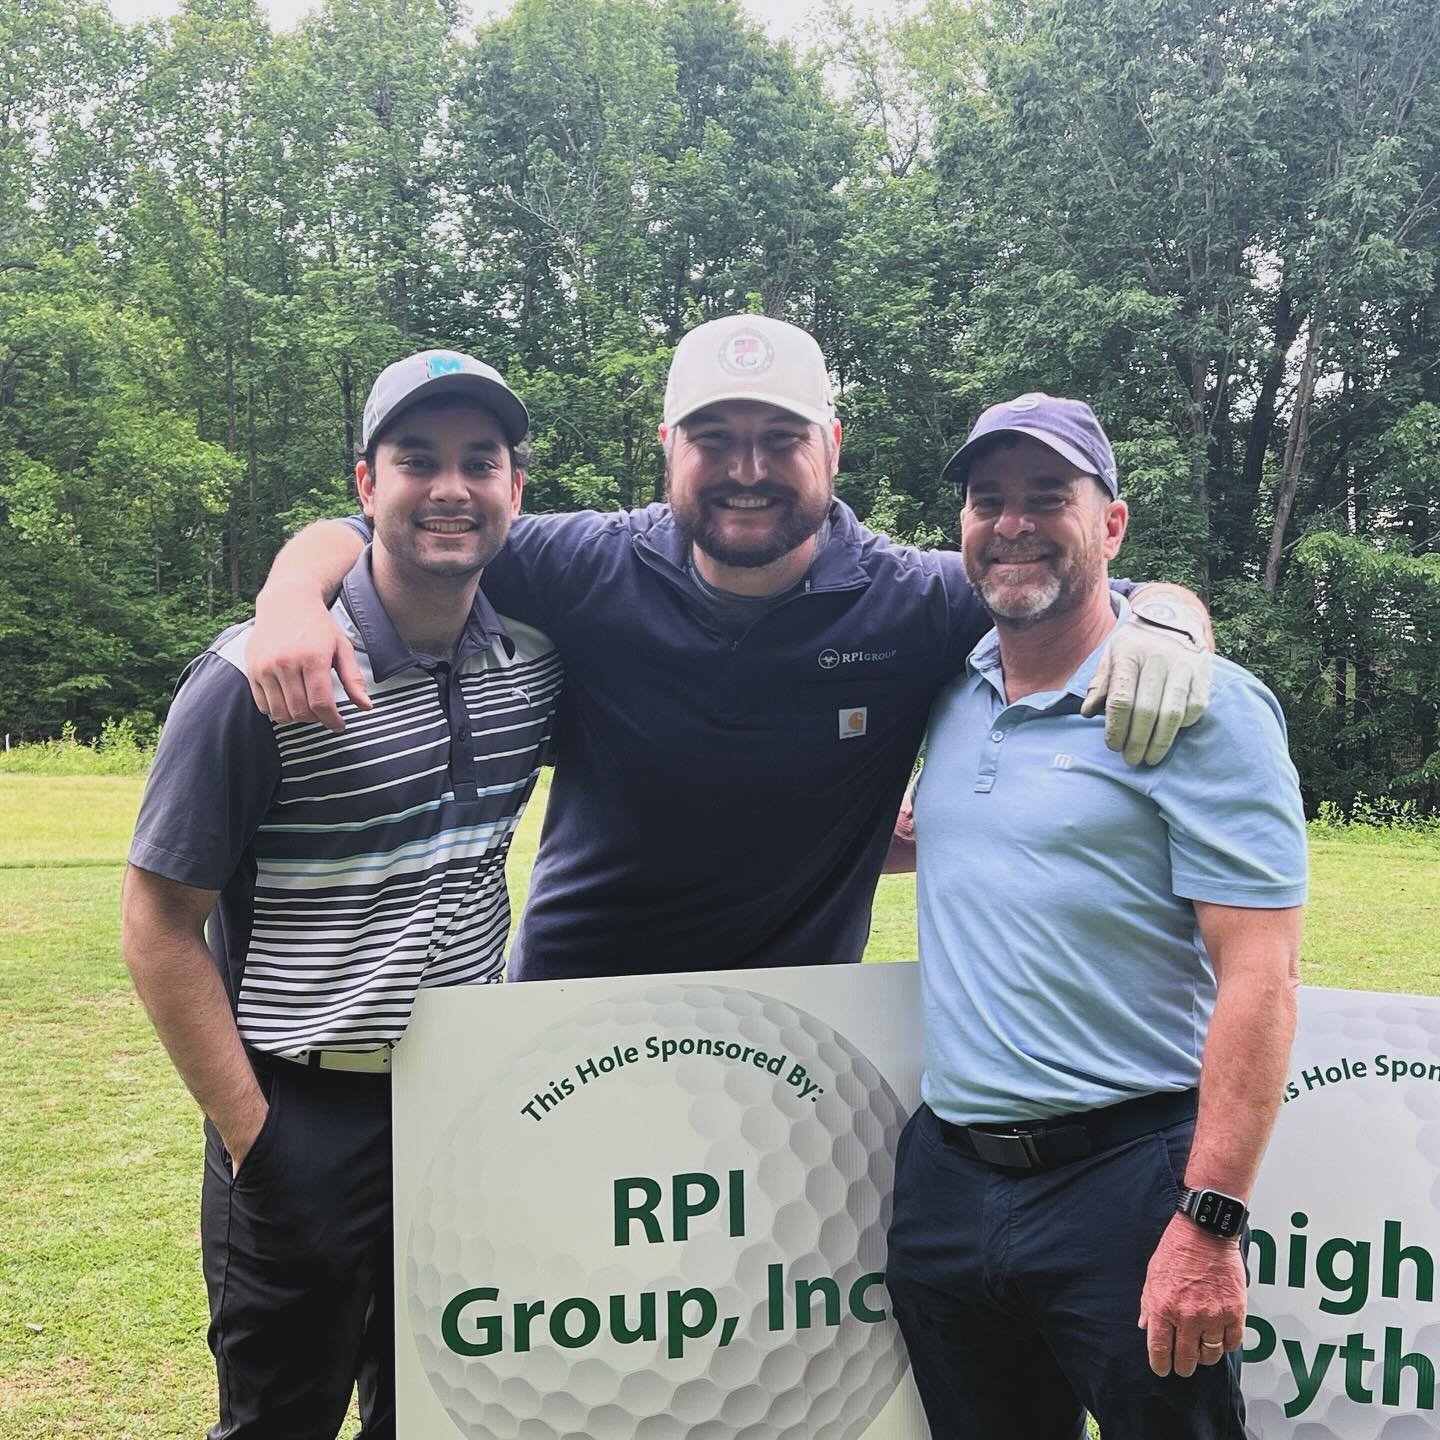 Yesterday, our in-house golf pros attended a golf tournament to benefit Big Brothers Big Sisters of Fredericksburg. They enjoyed raising money for a good cause and had a lot of fun while doing it! Another example of how our employees make a differenc